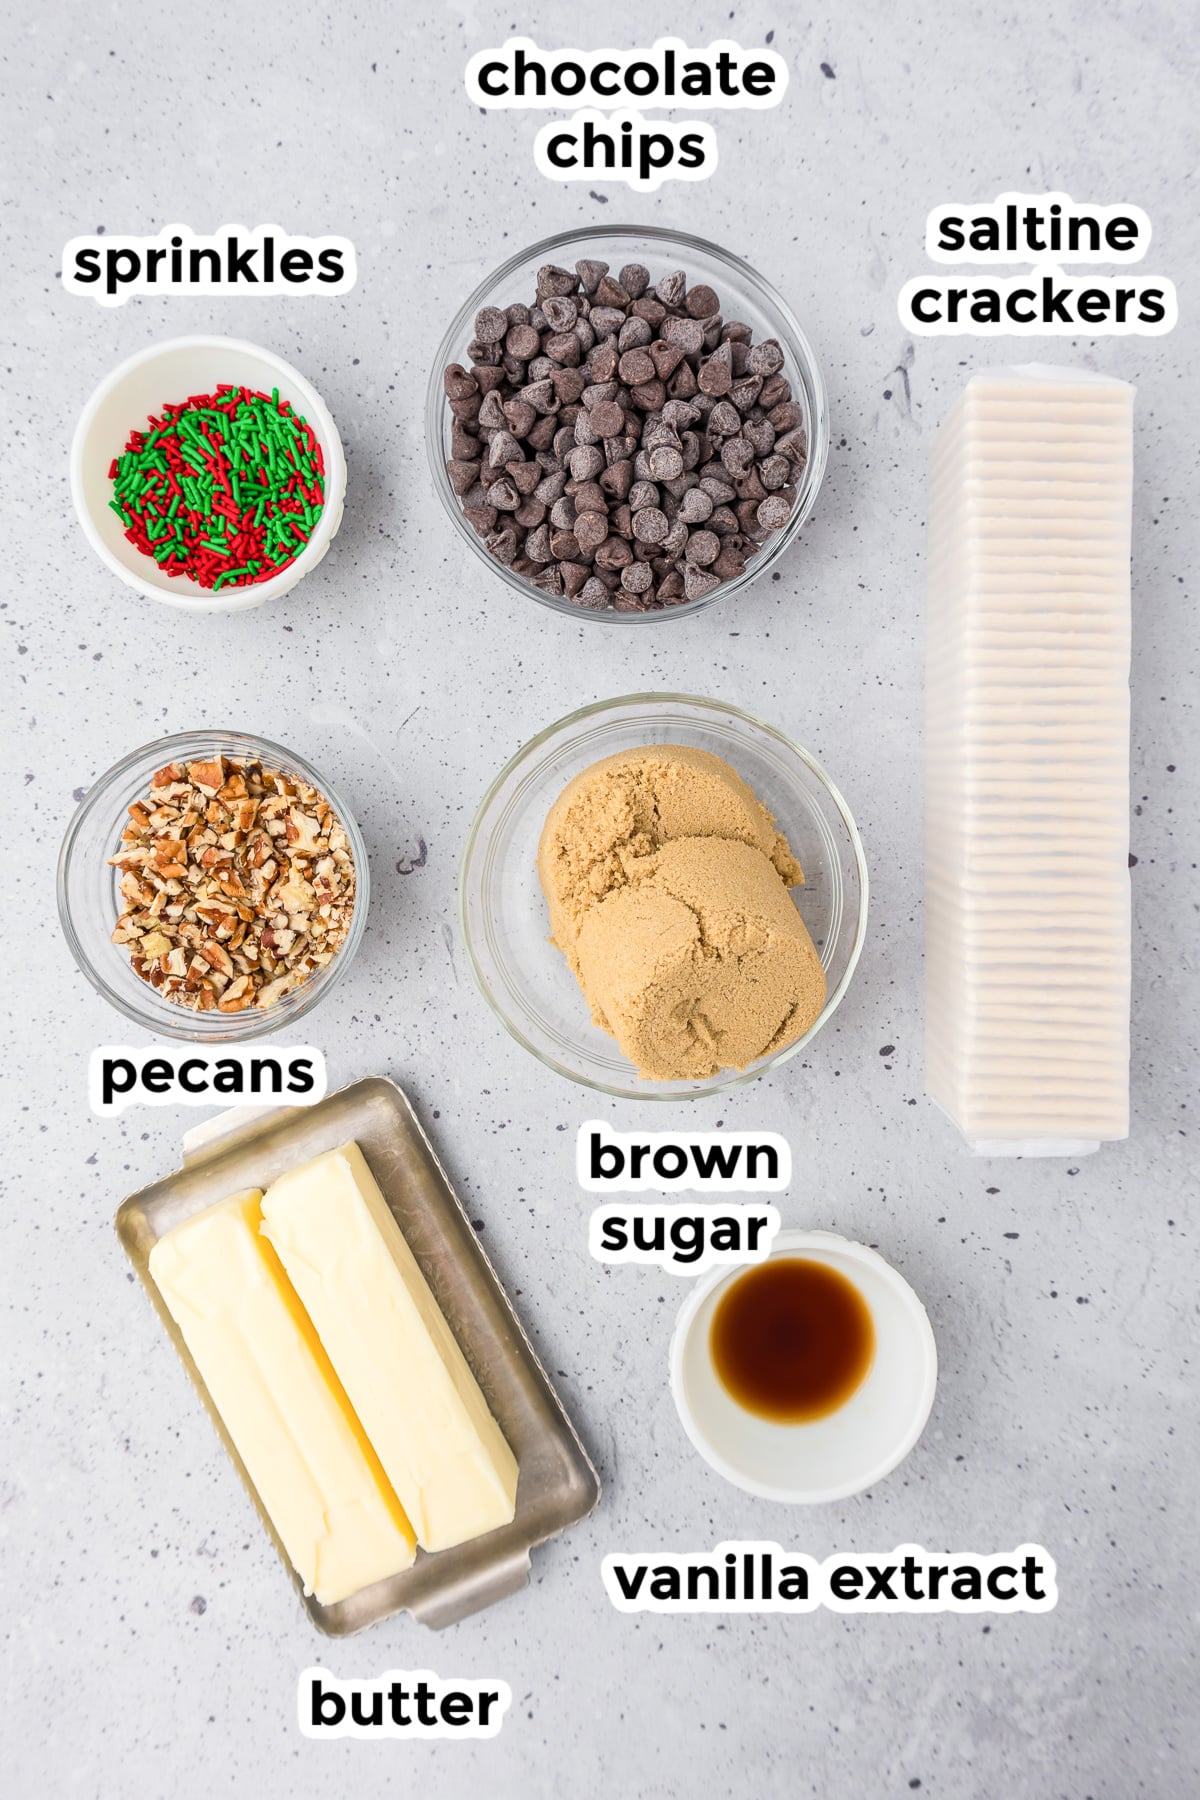 Ingredients for saltine cracker toffee on a counter in bowls with text title labels.